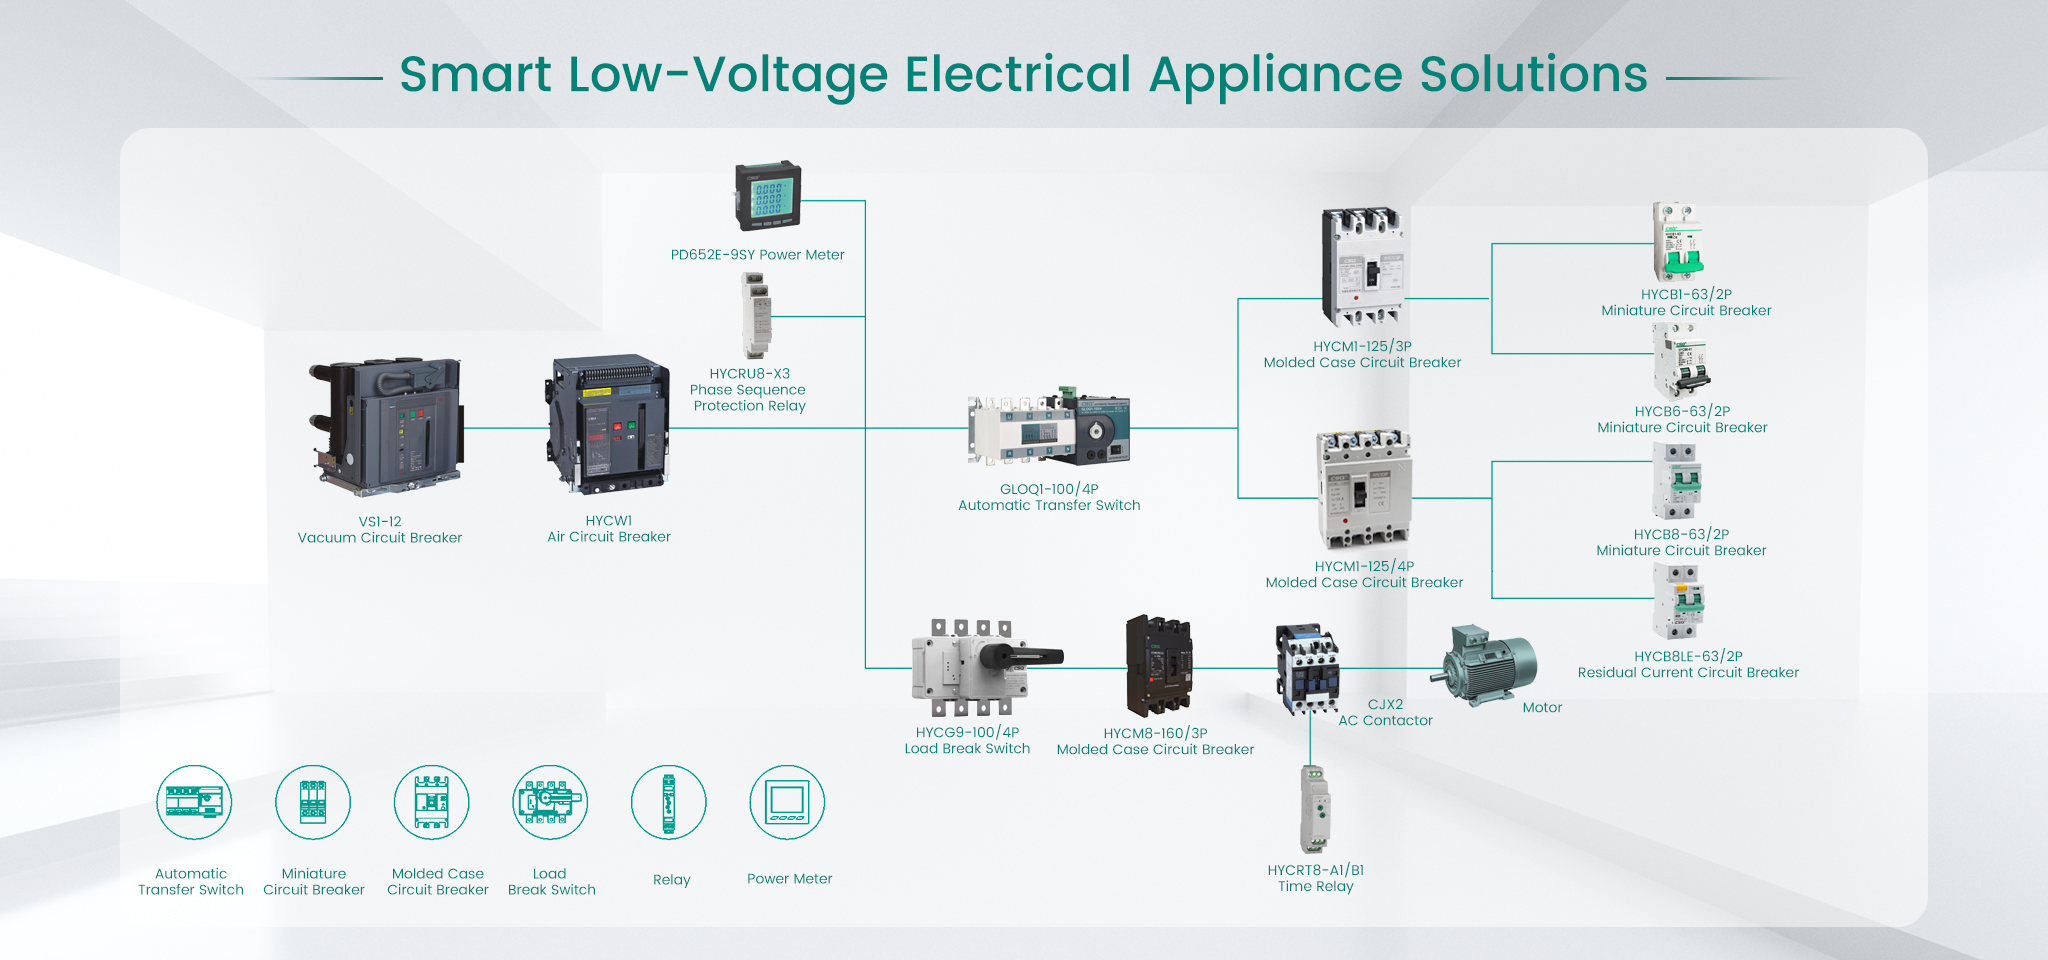 Smart Low-Voltage Electrical Appliance Solutions